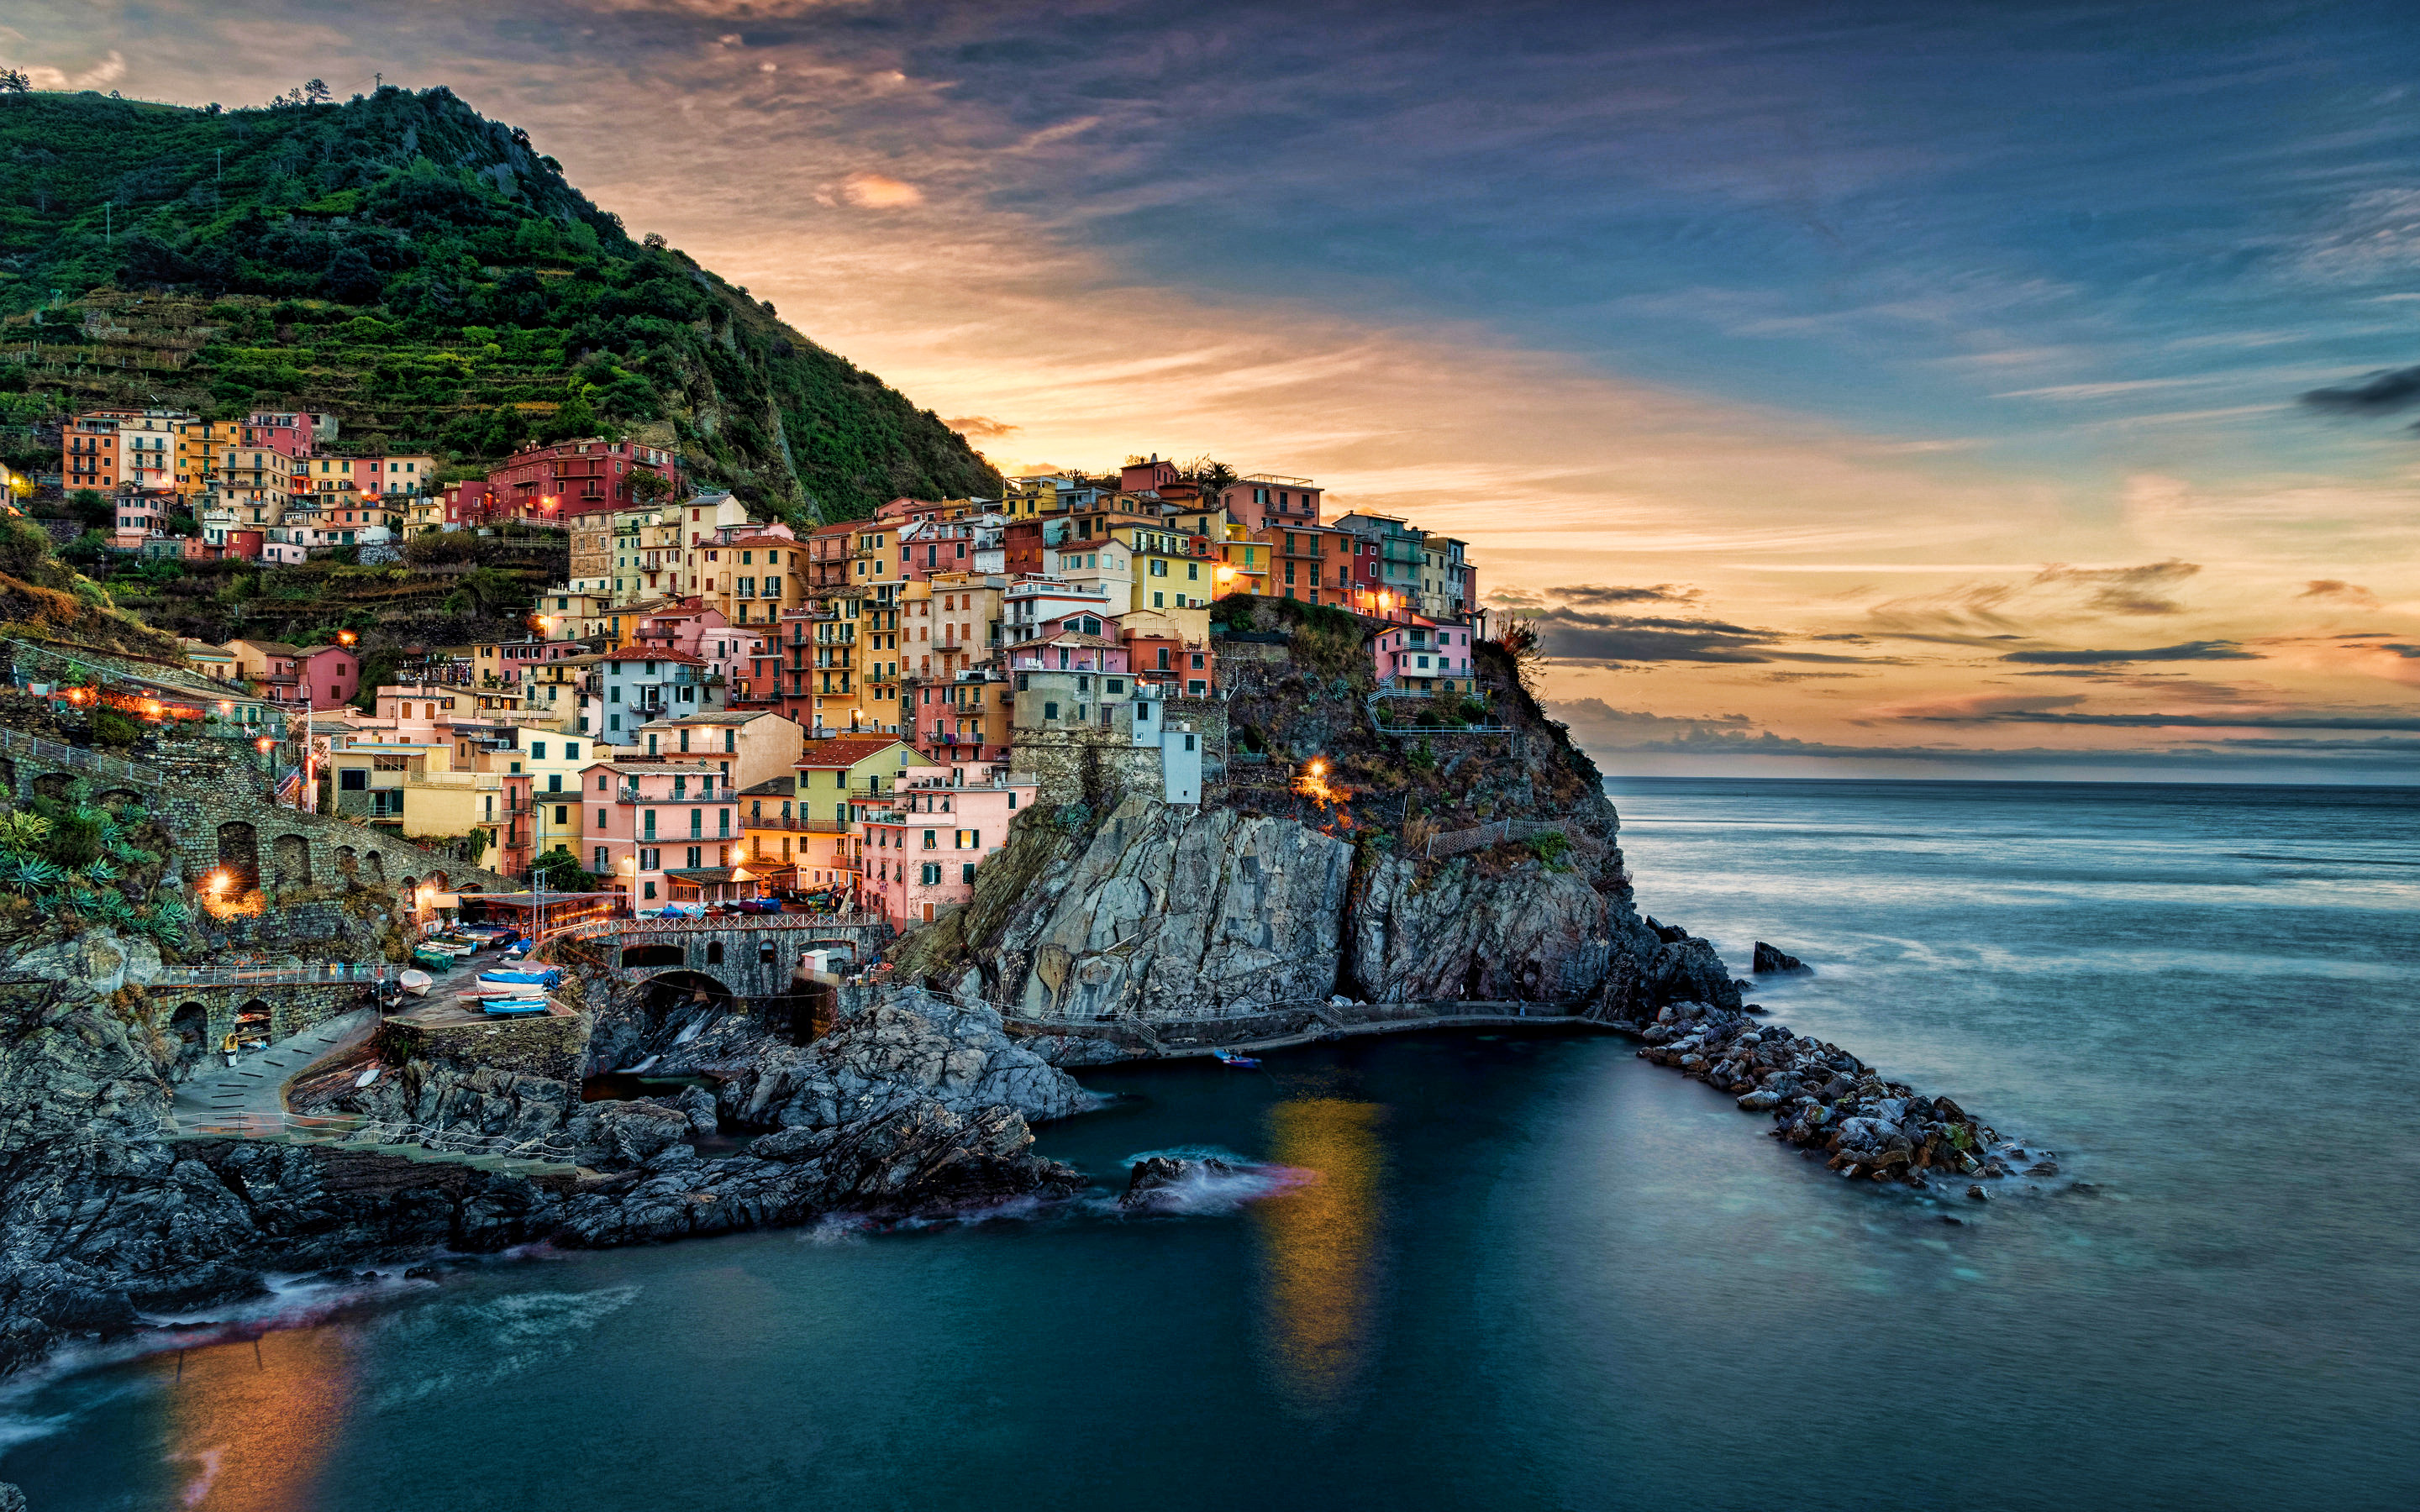 Download wallpaper Manarola, twilight, summer, italian cities, harbor, Cinque Terre, Italy, Europe, Manarola at evening for desktop with resolution 2880x1800. High Quality HD picture wallpaper